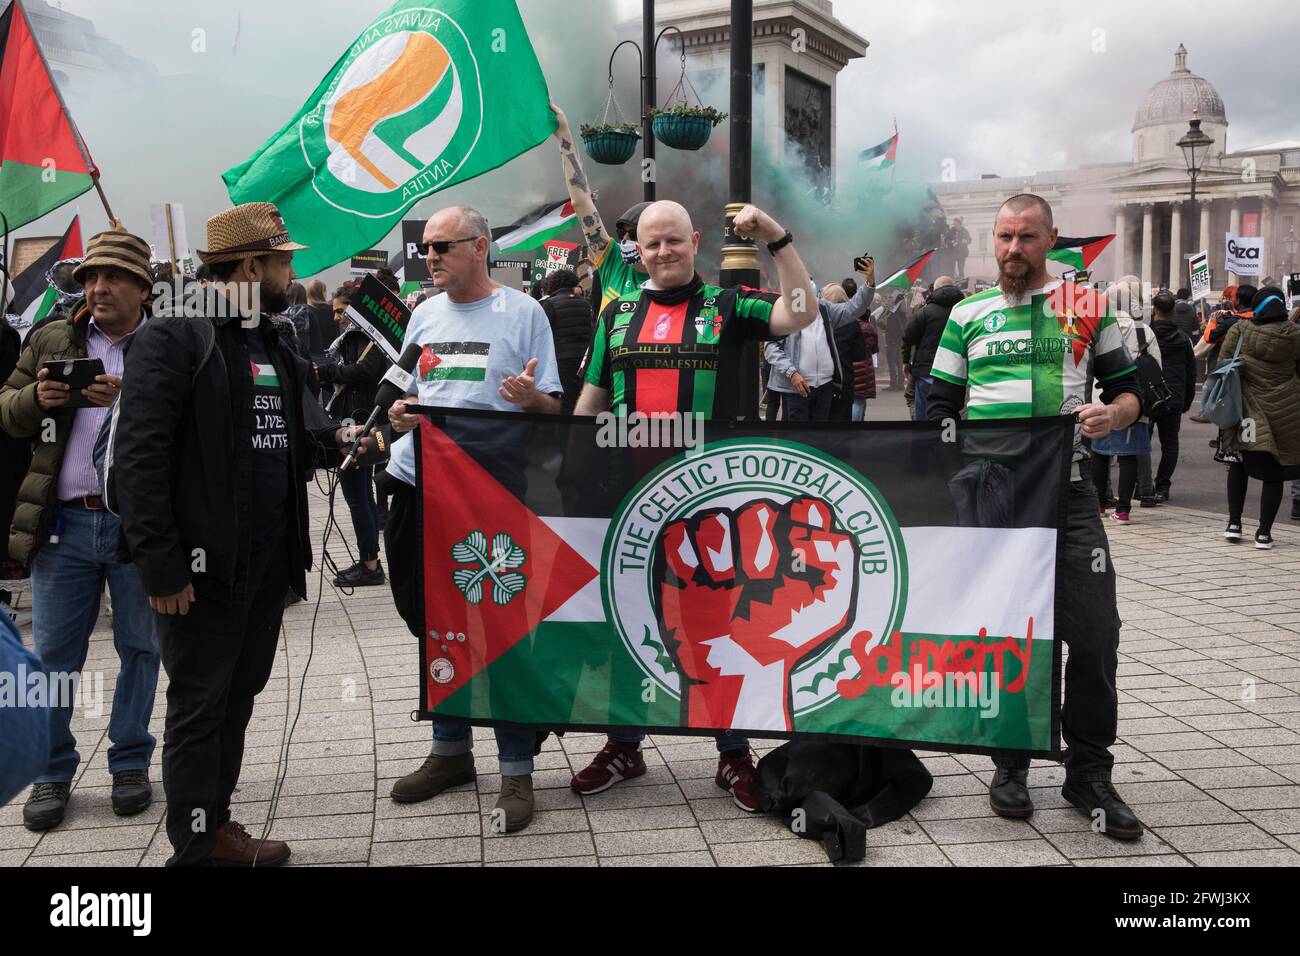 London, UK. 22 May, 2021. Celtic FC fans, well-known for their support of the Palestinian cause, join tens of thousands of people taking part in the National Demonstration for Palestine. It was organised by pro-Palestinian solidarity groups in protest against Israel's recent attacks on Gaza, its incursions at the Al-Aqsa mosque and its attempts to forcibly displace Palestinian families from the Sheikh Jarrah neighbourhood of East Jerusalem. Credit: Mark Kerrison/Alamy Live News Stock Photo